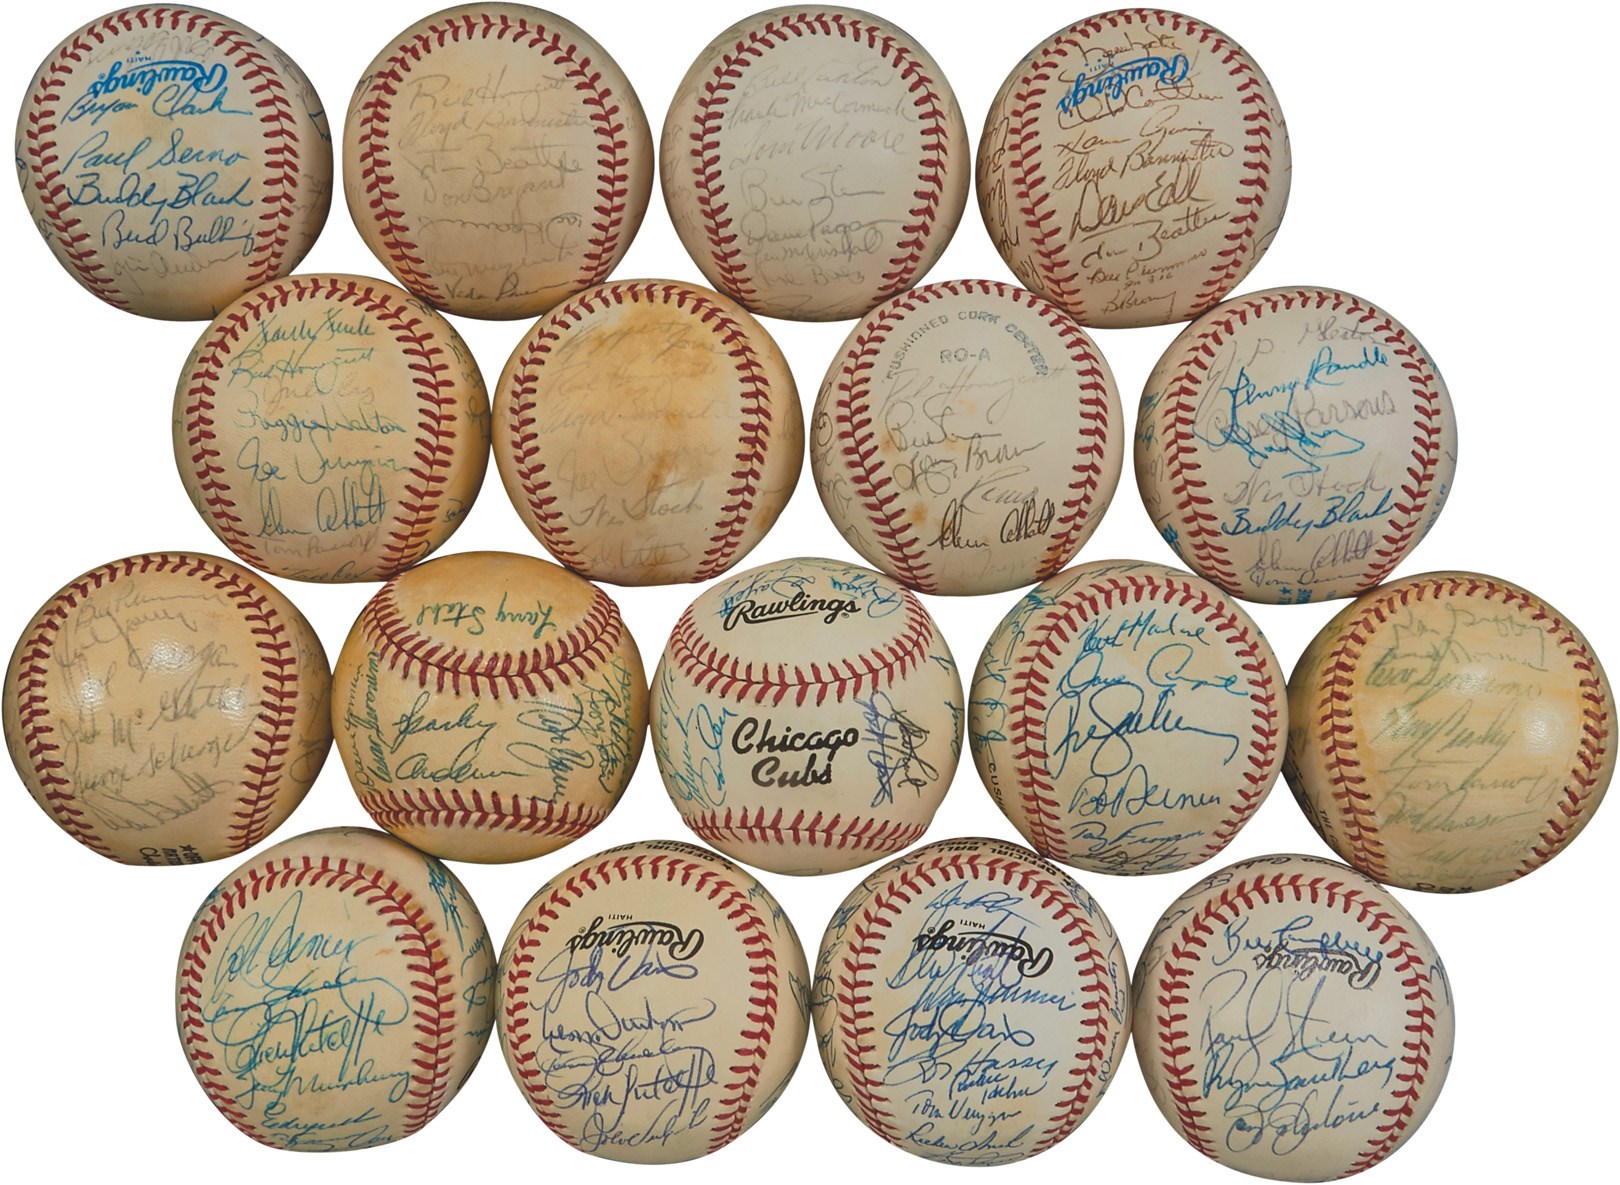 1970s-80s Reds, Mariners & Cubs Team-Signed Baseballs (17)